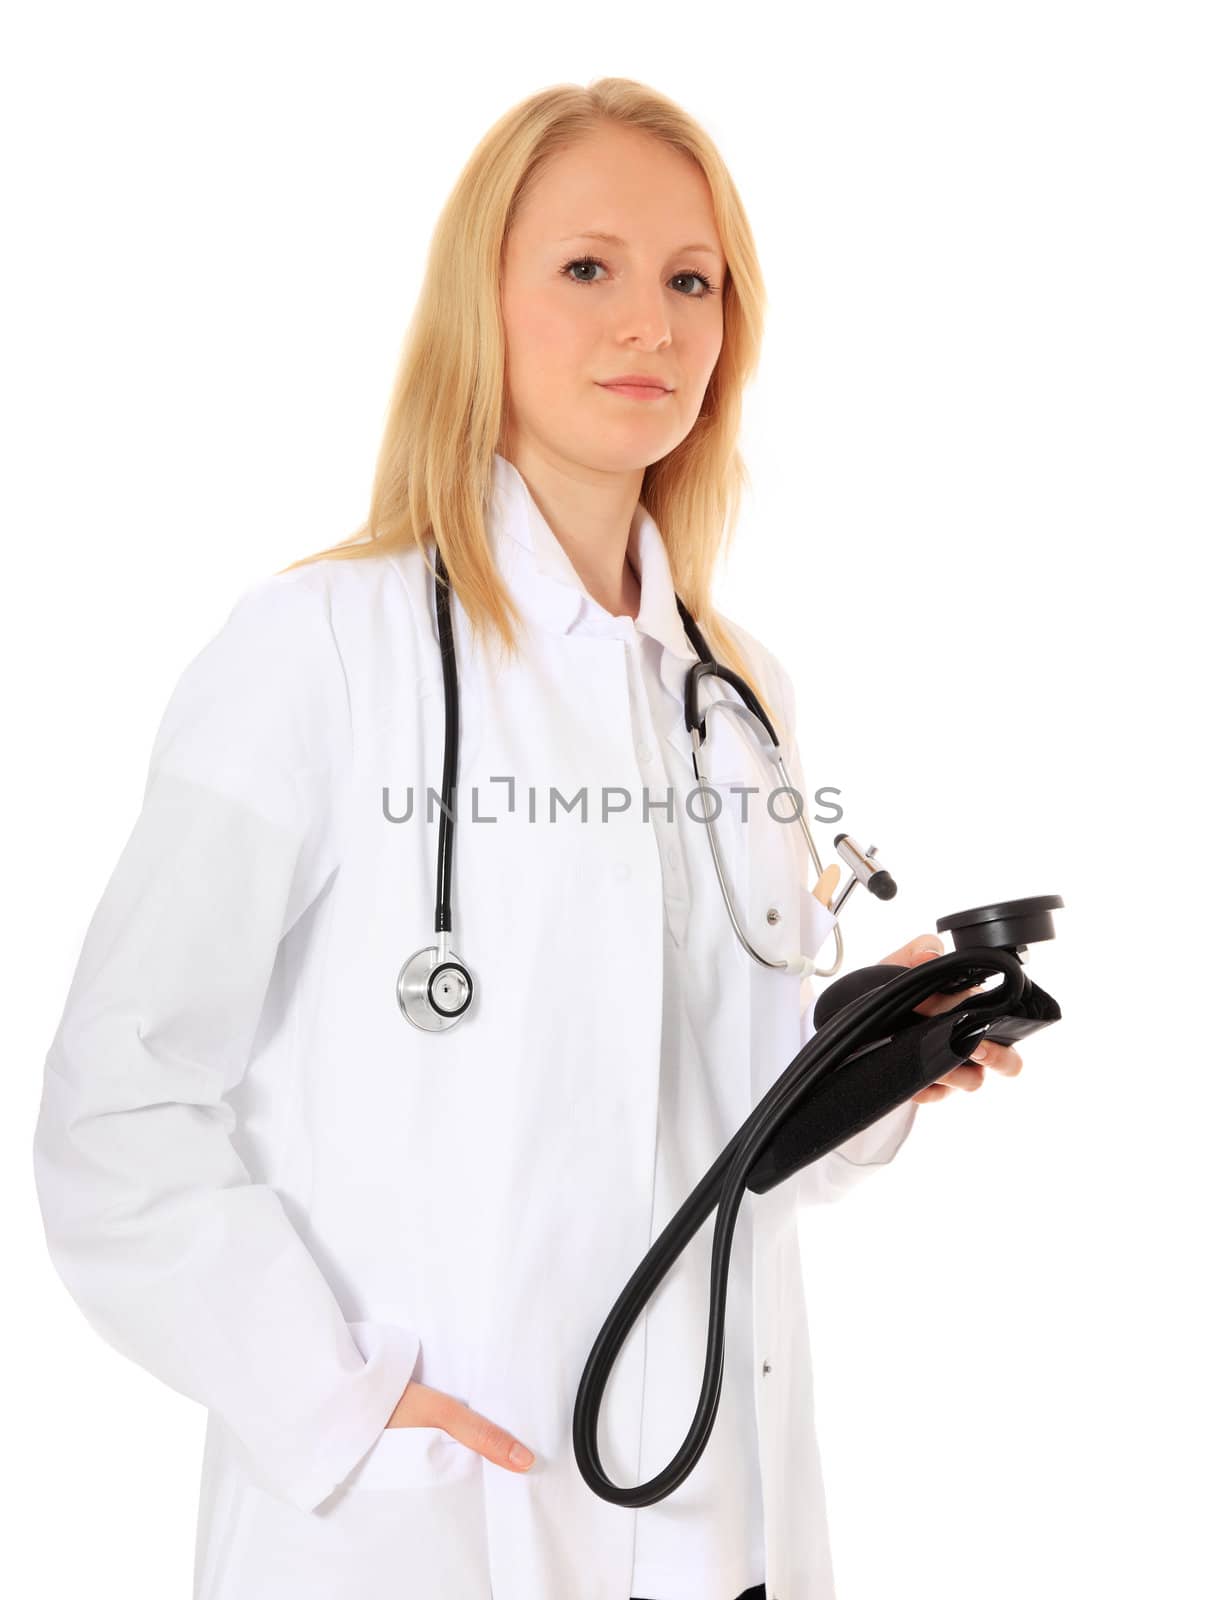 Attractive medical student. All on white background.